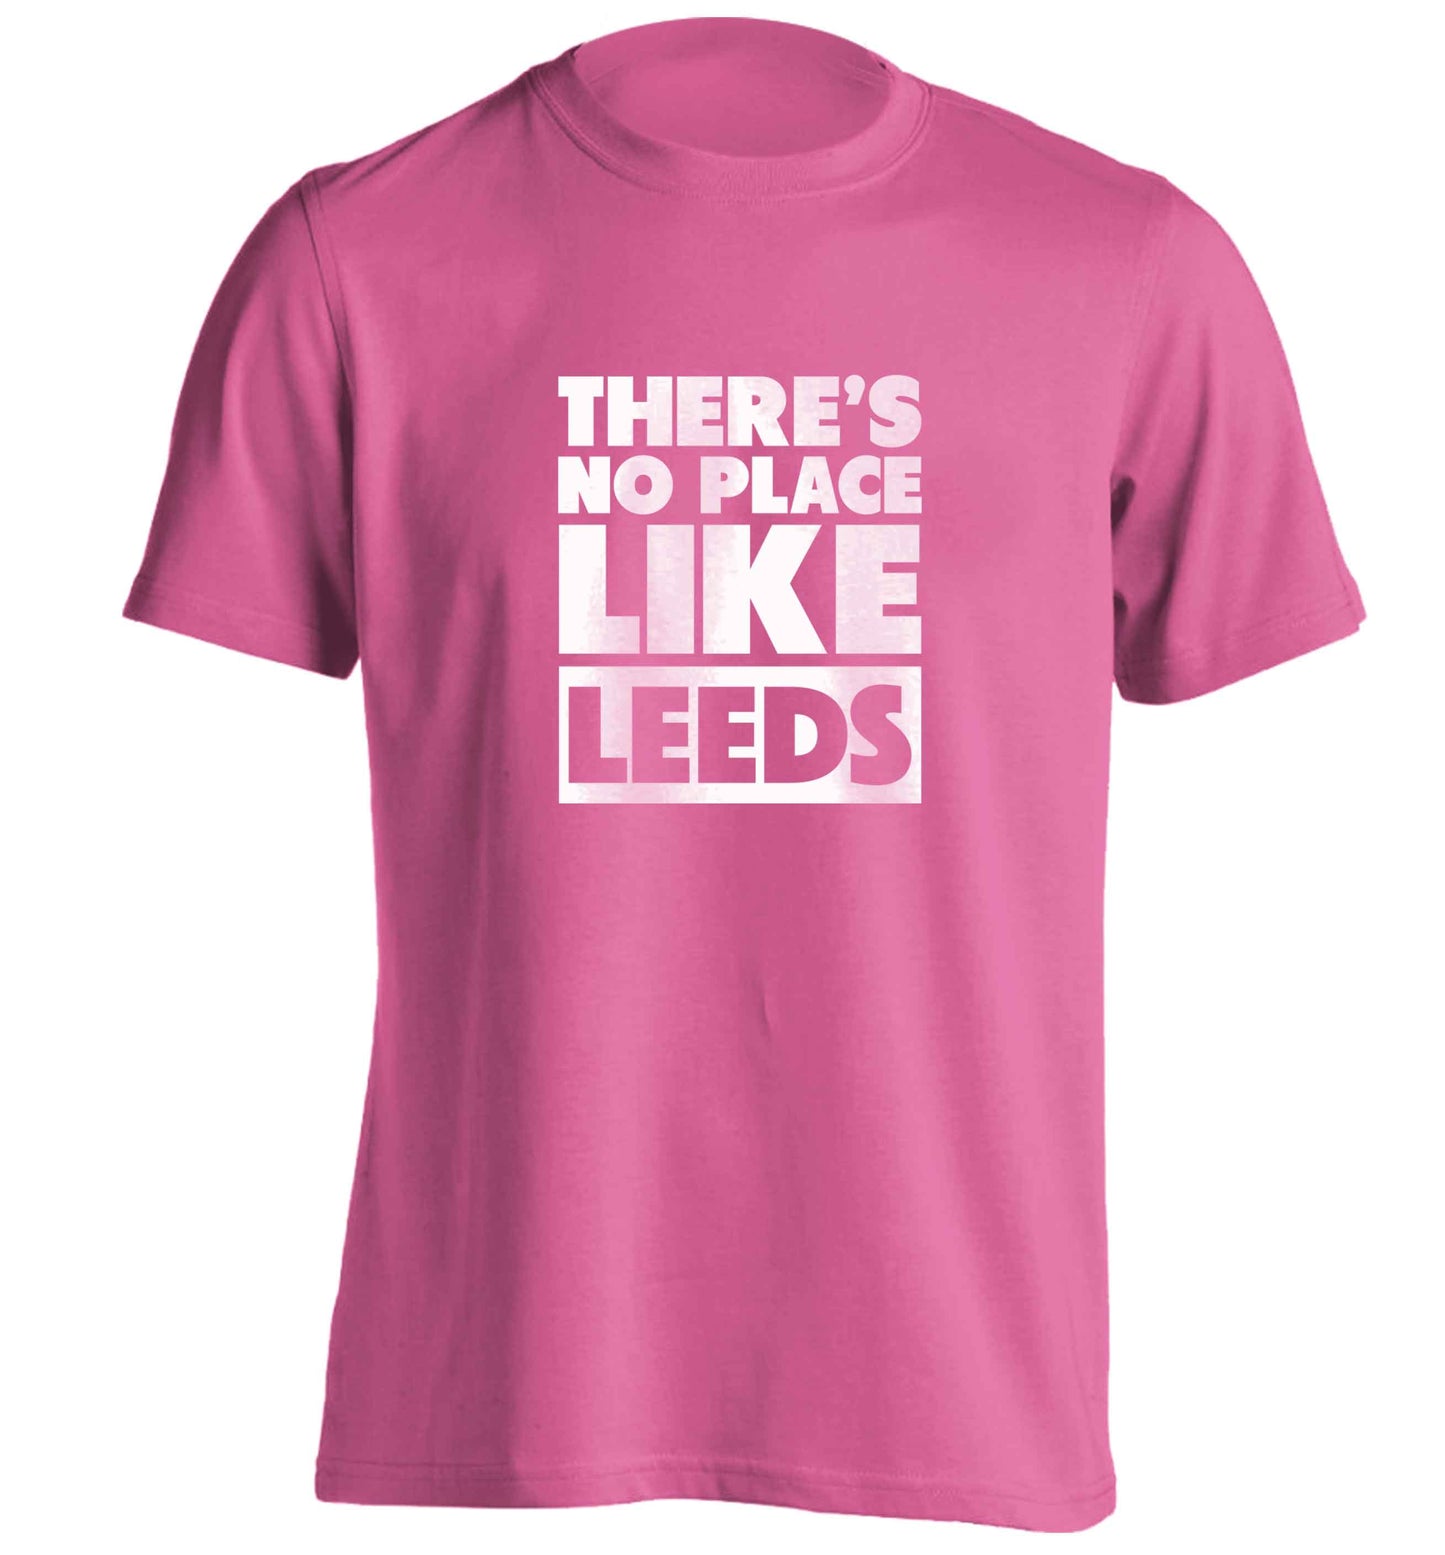 There's no place like Leeds adults unisex pink Tshirt 2XL